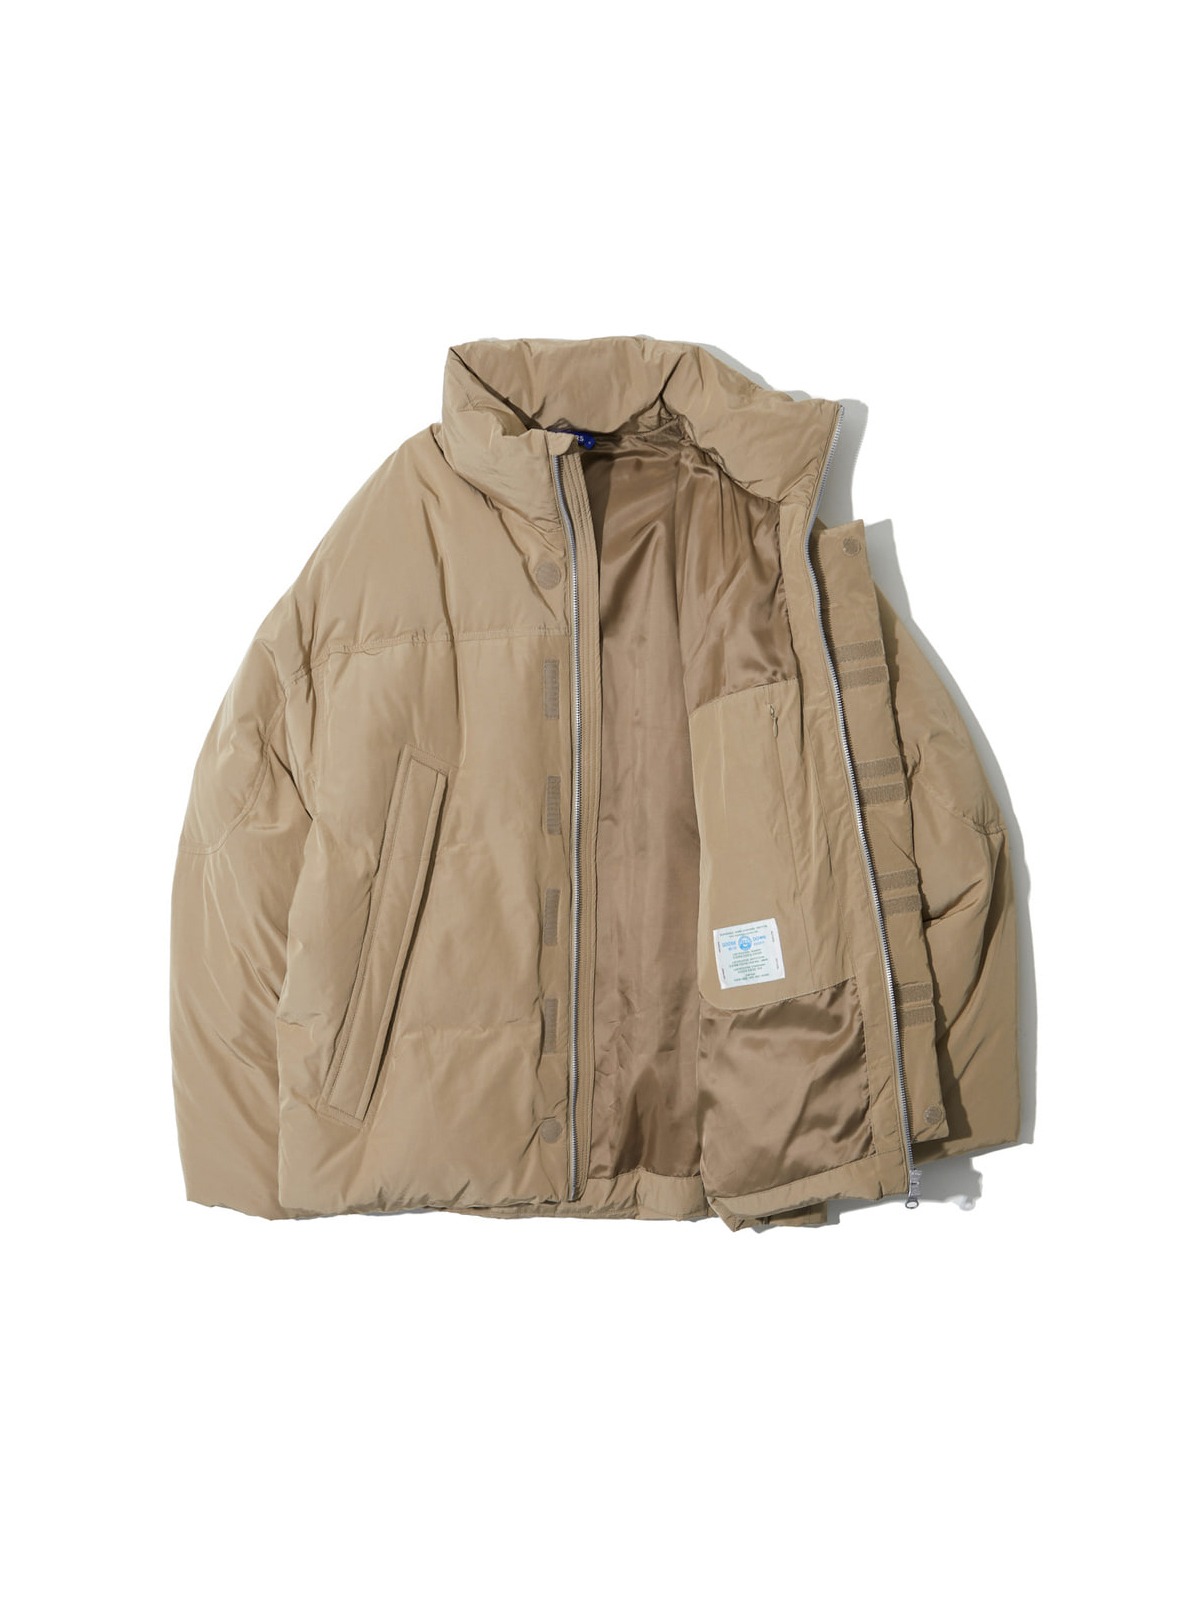 Goose Down Daily Jacket (Beige)